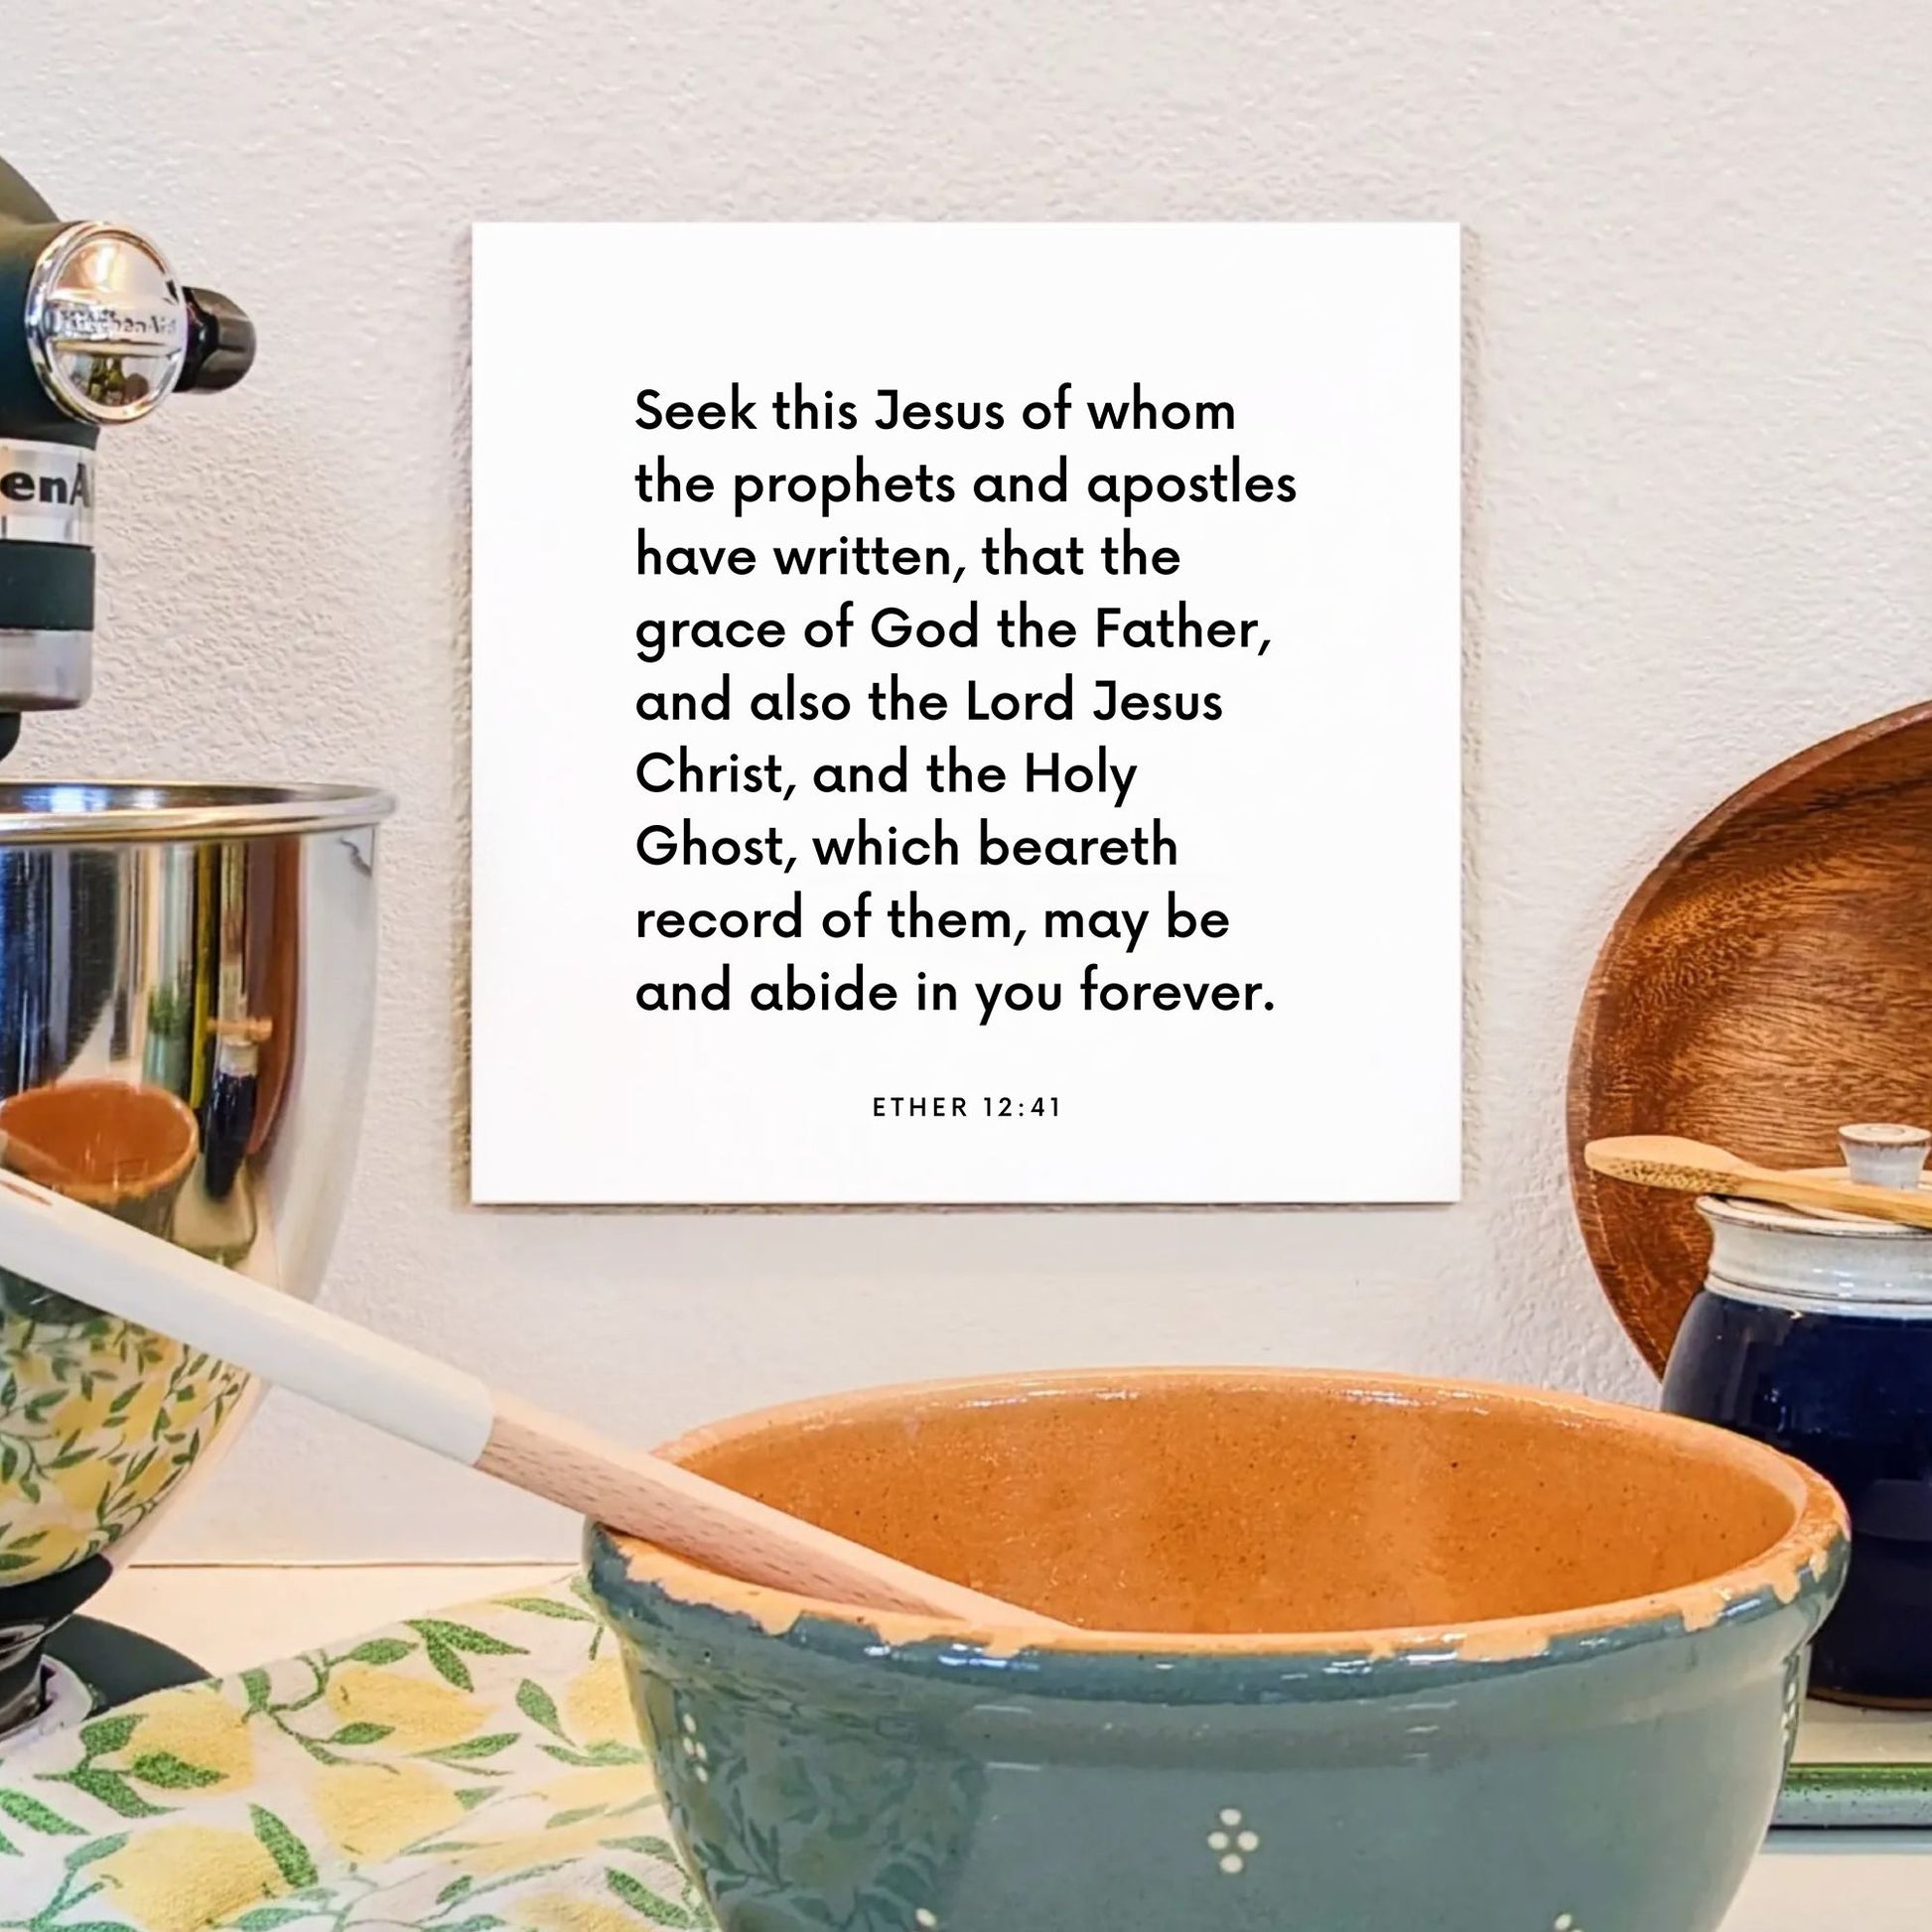 Kitchen mouting of the scripture tile for Ether 12:41 - "Seek this Jesus of whom the prophets have written"